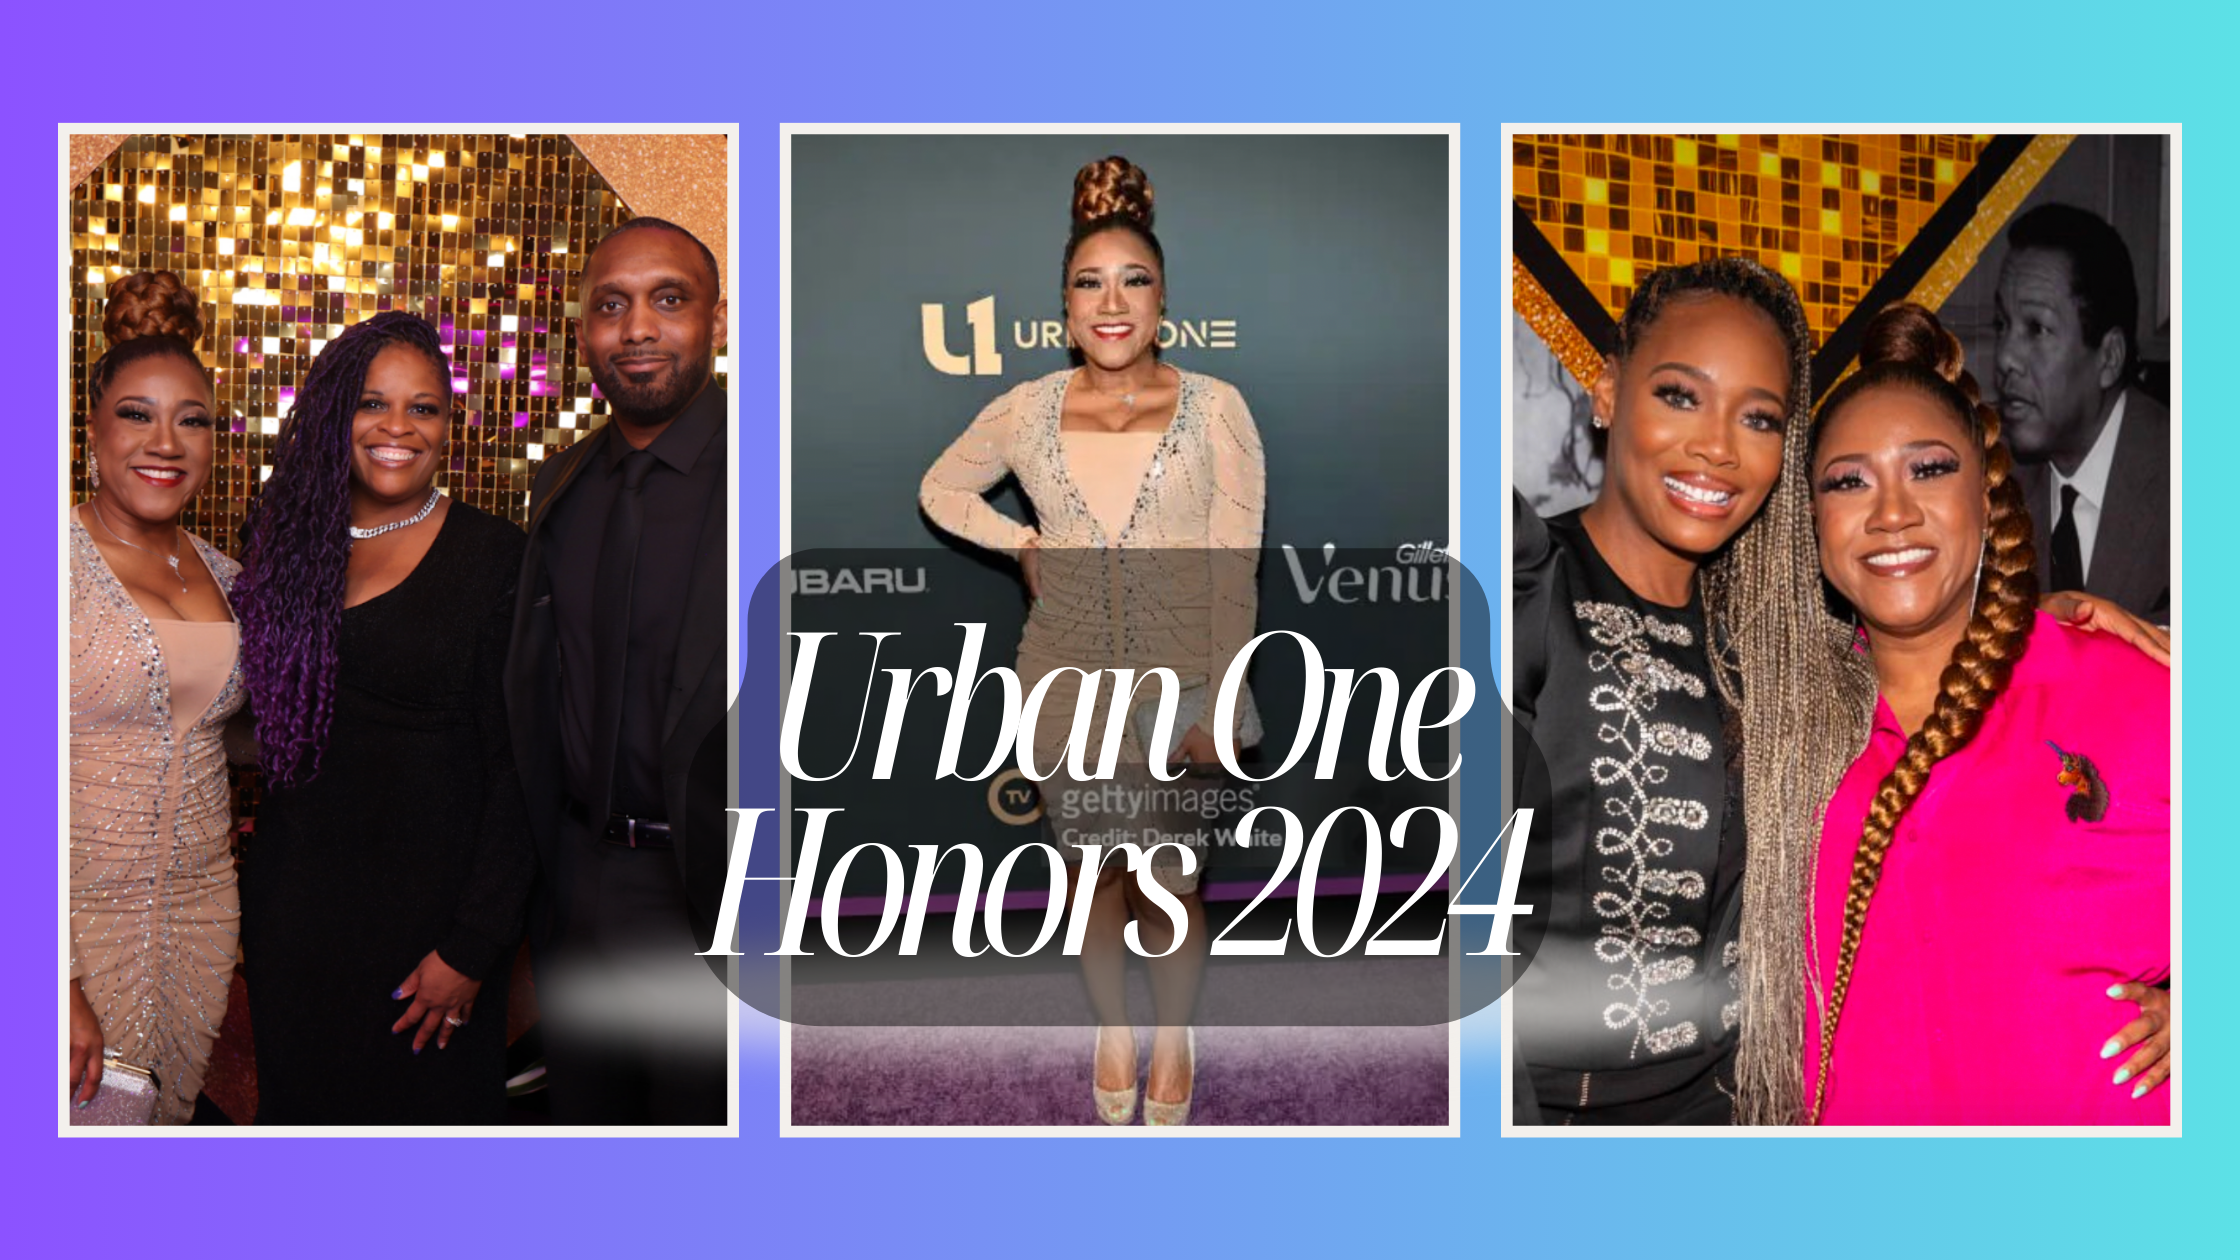 Afro Unicorn Founder and CEO April Showers Shines at Urban One Honors 2024